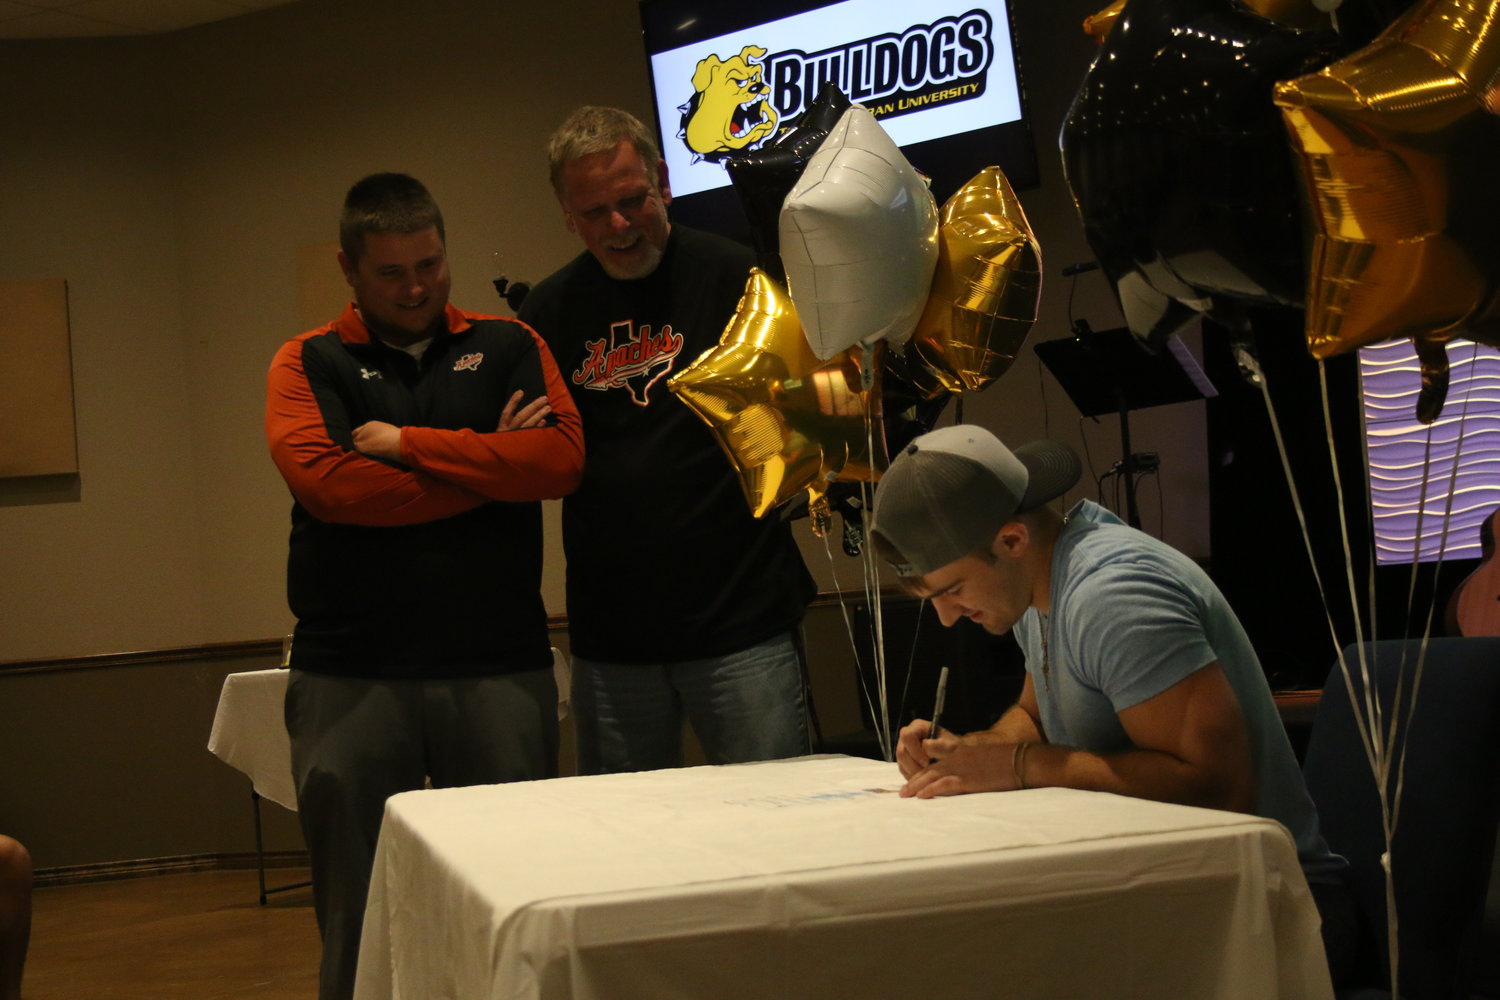 Seth Gibson signed on to play football at Texas Lutheran University last Wednesday, the last week of school.  